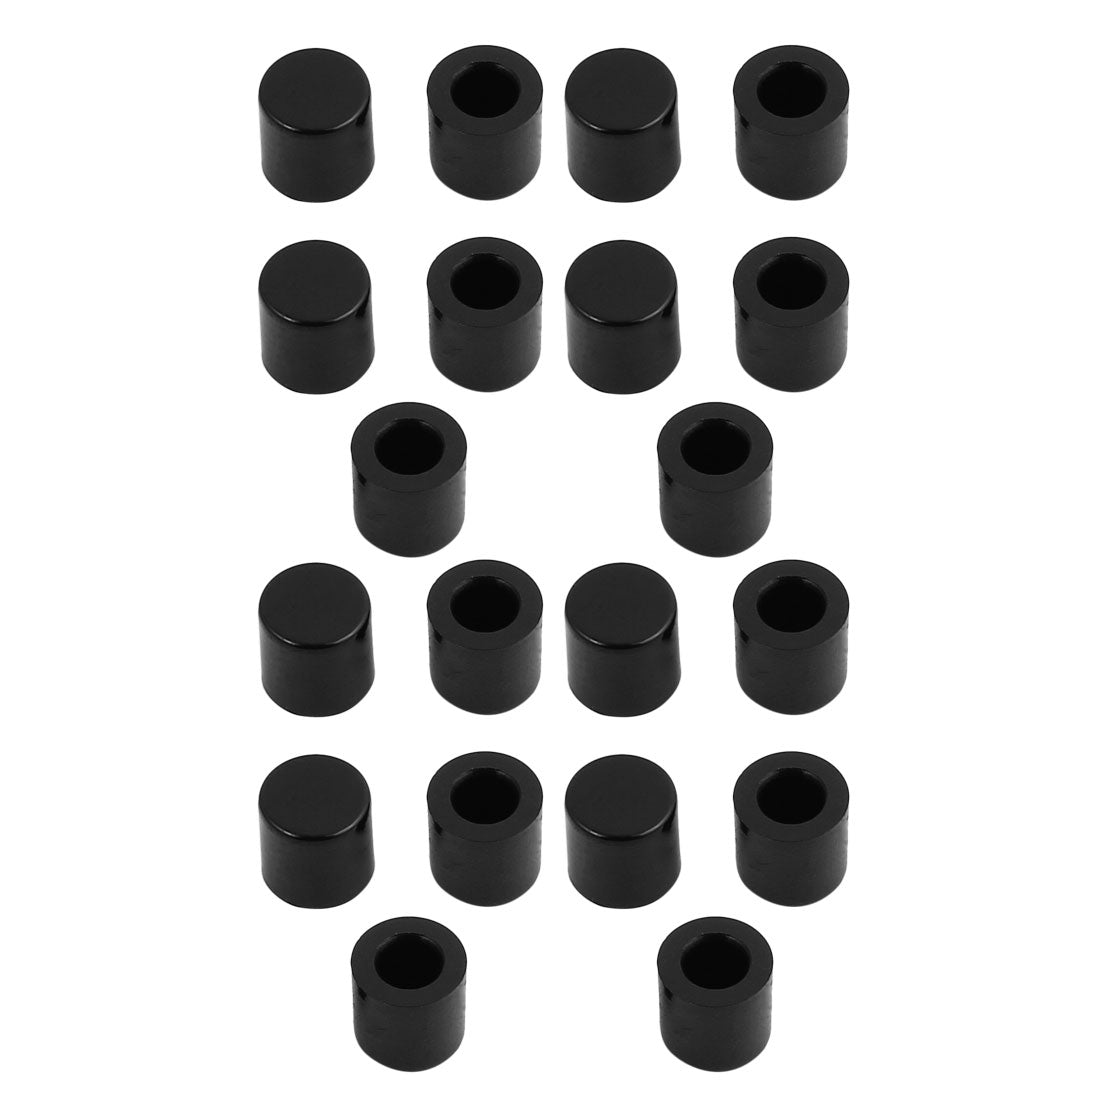 uxcell Uxcell 20Pcs Round Shaped Tactile Button Caps Covers Protector Black for 6x6mm Tact Switch